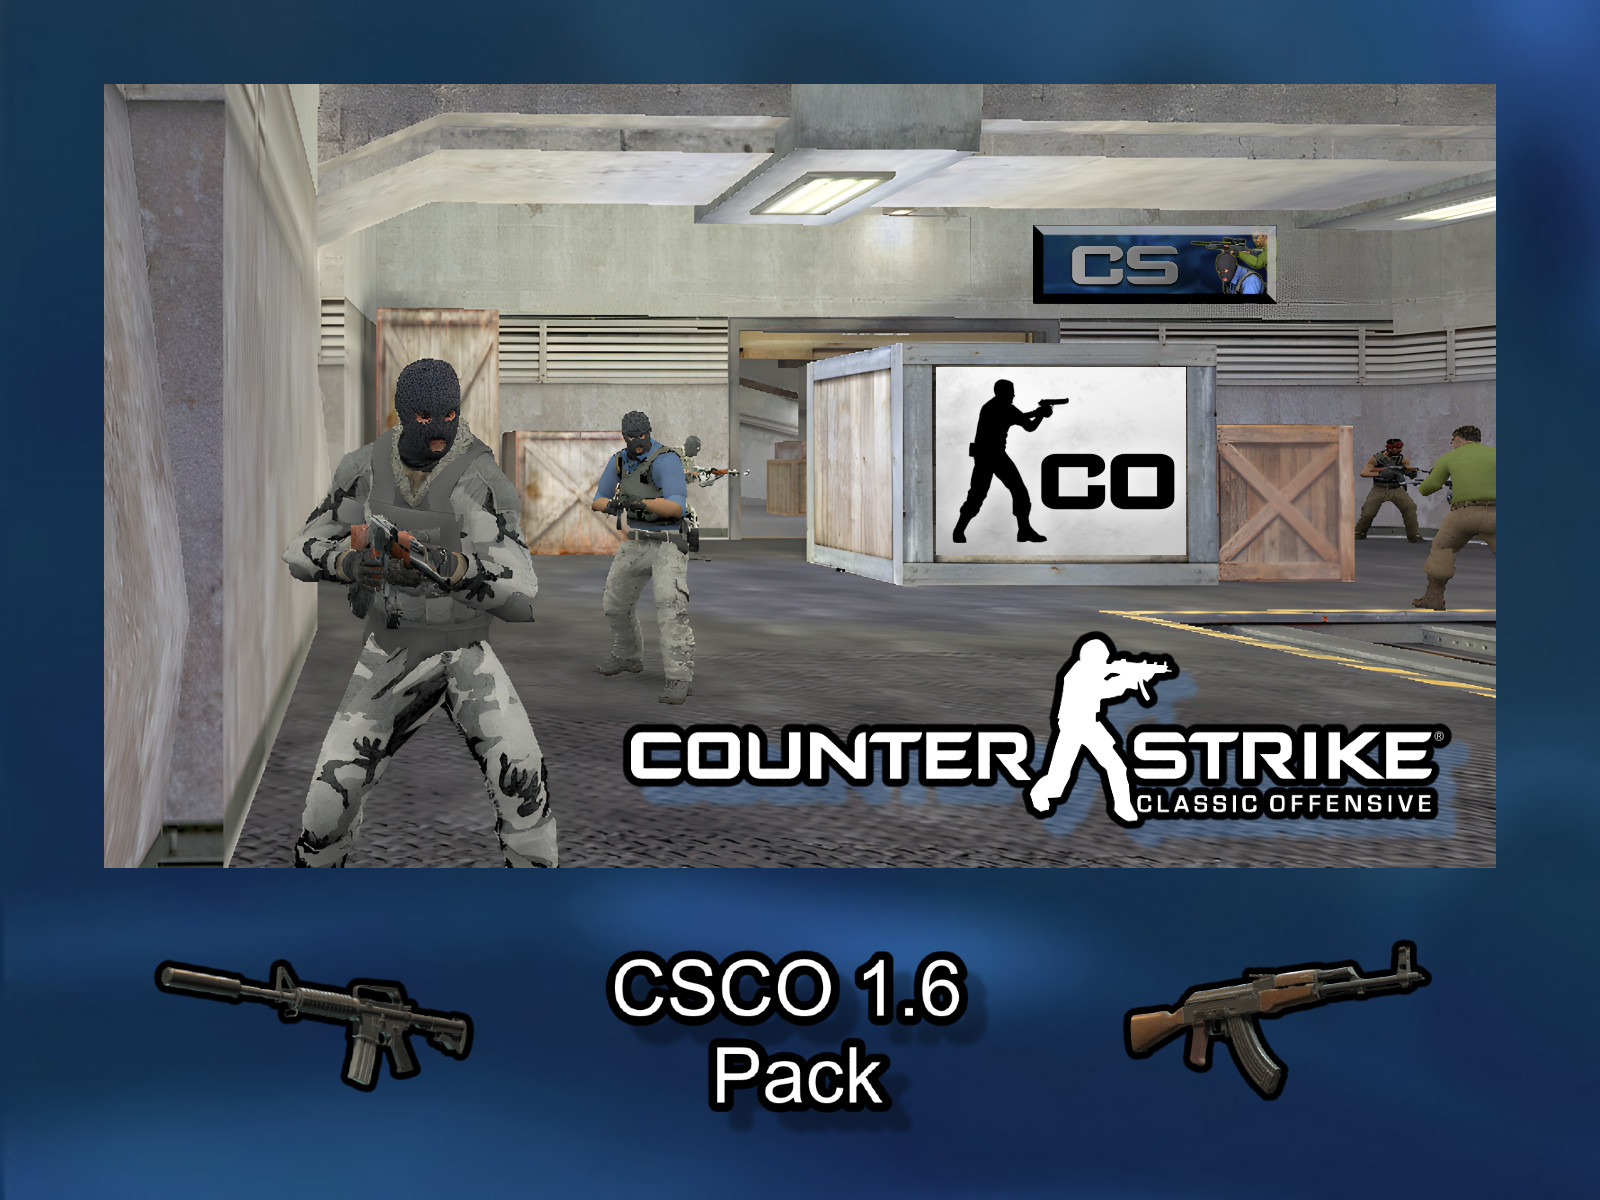 CS 1.6 Classic Offensive player skins